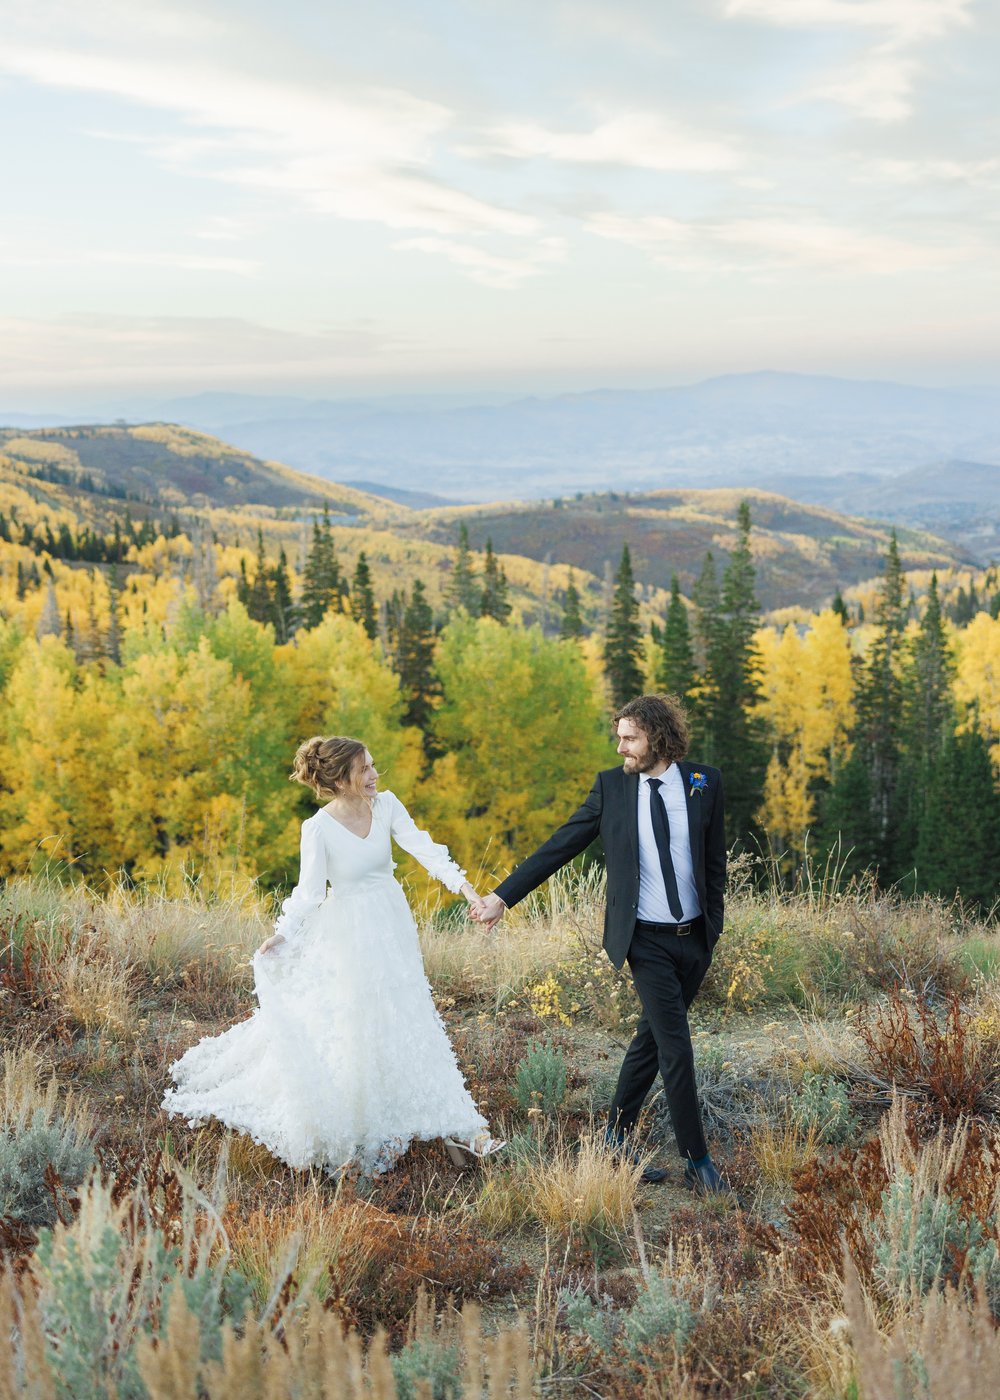  Savanna Richardson Photography captures a bride and groom with fall leaves at Silver Lake in the Cottonwood Canyon. fall bridals #SavannaRichardsonPhotography #SavannaRichardsonFormals #CottonwoodCanyon #WeddingFormals #SLCWedding #fallwed 